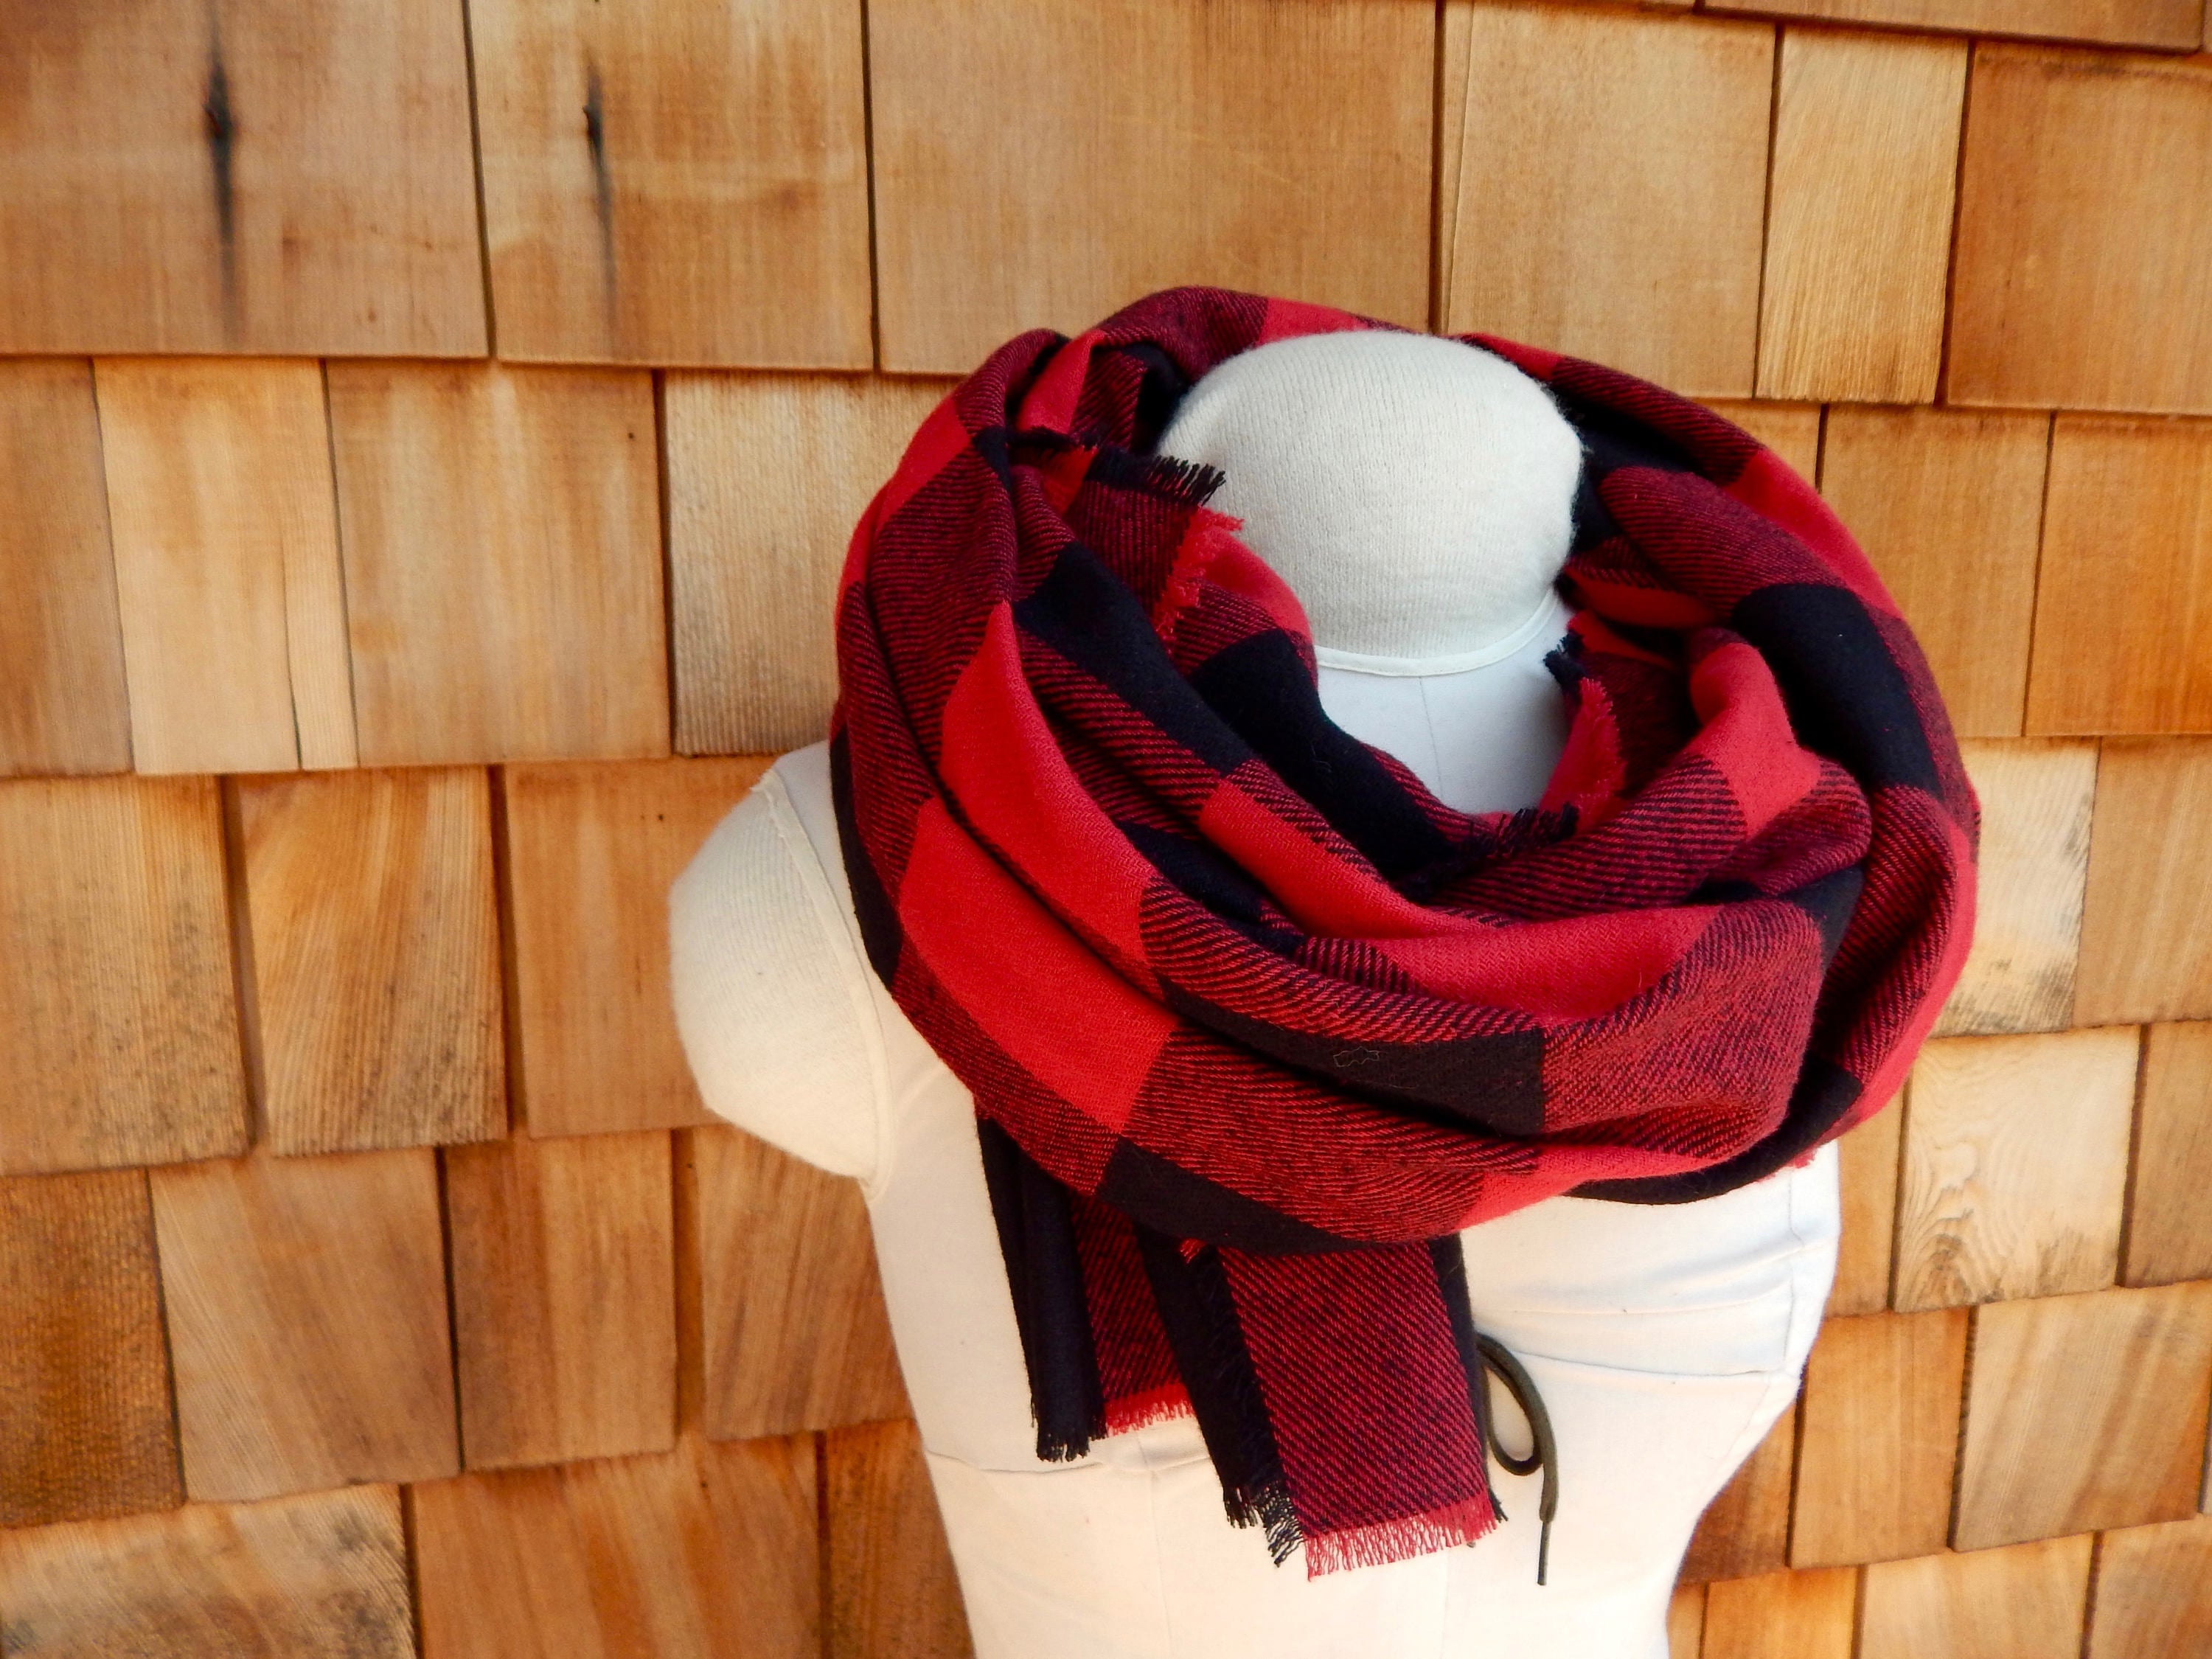 Buffalo Plaid Scarf in Red and Black